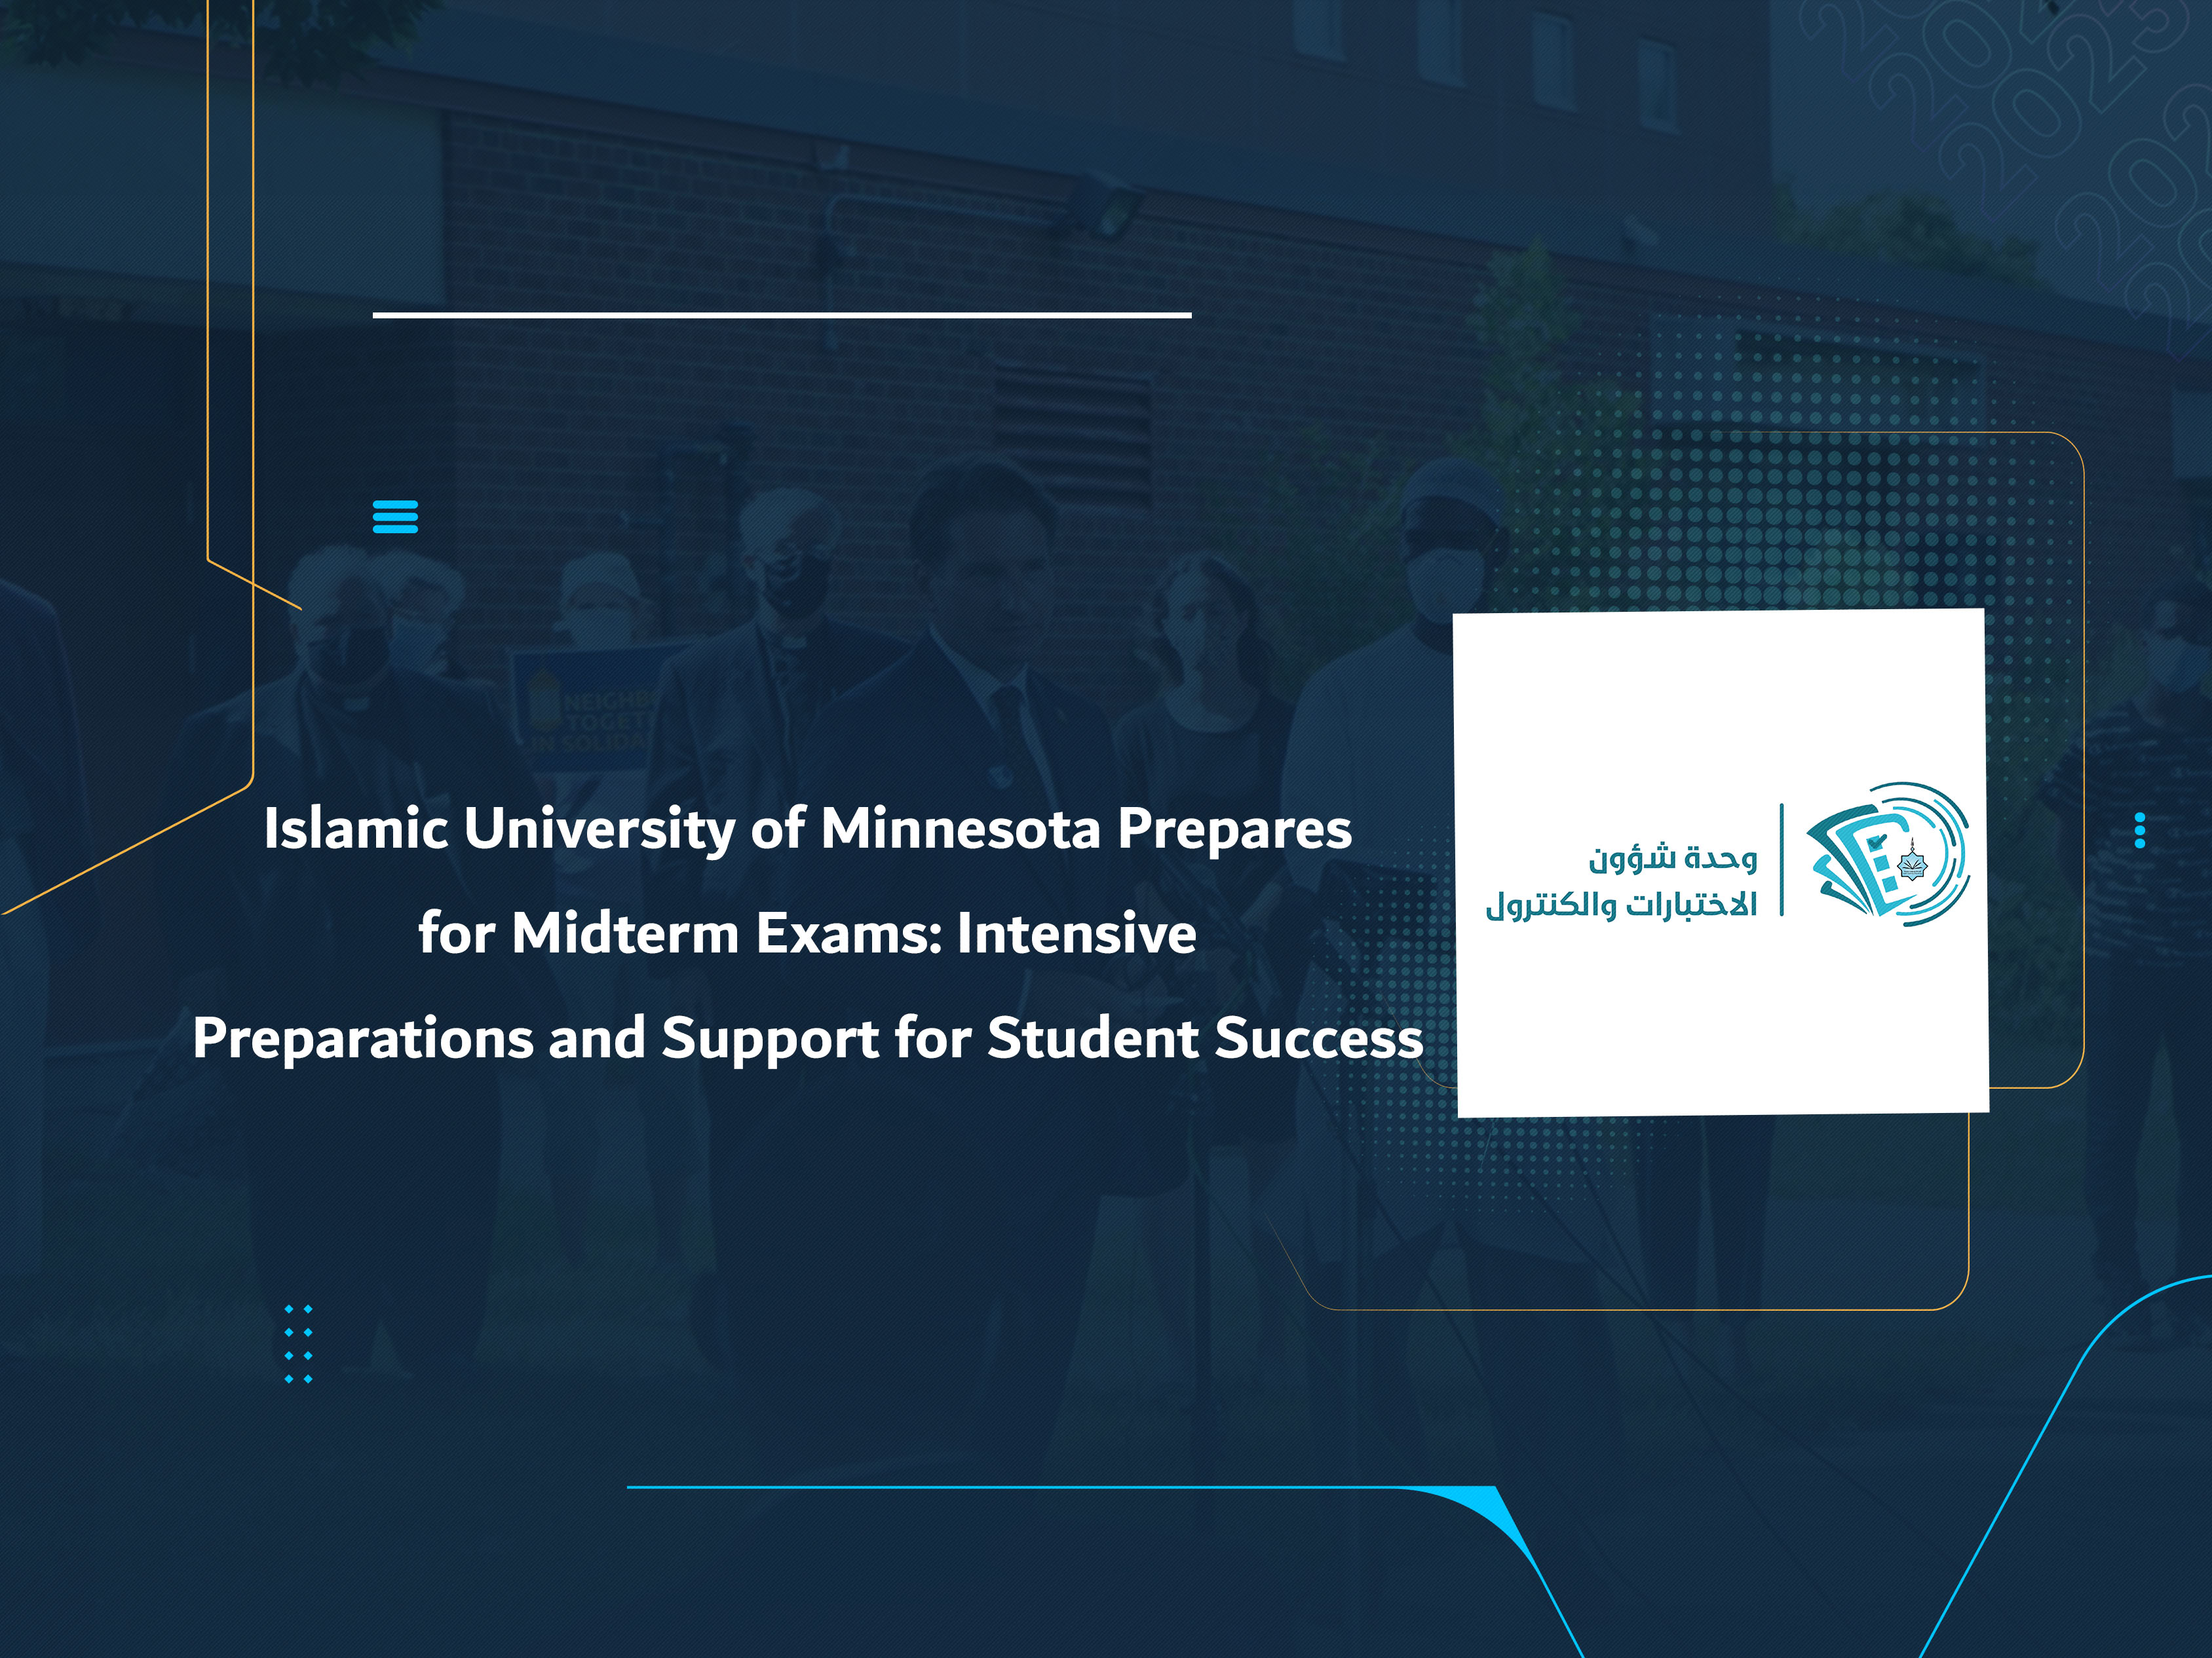 Islamic University of Minnesota Prepares for Midterm Exams: Intensive Preparations and Support for Student Success